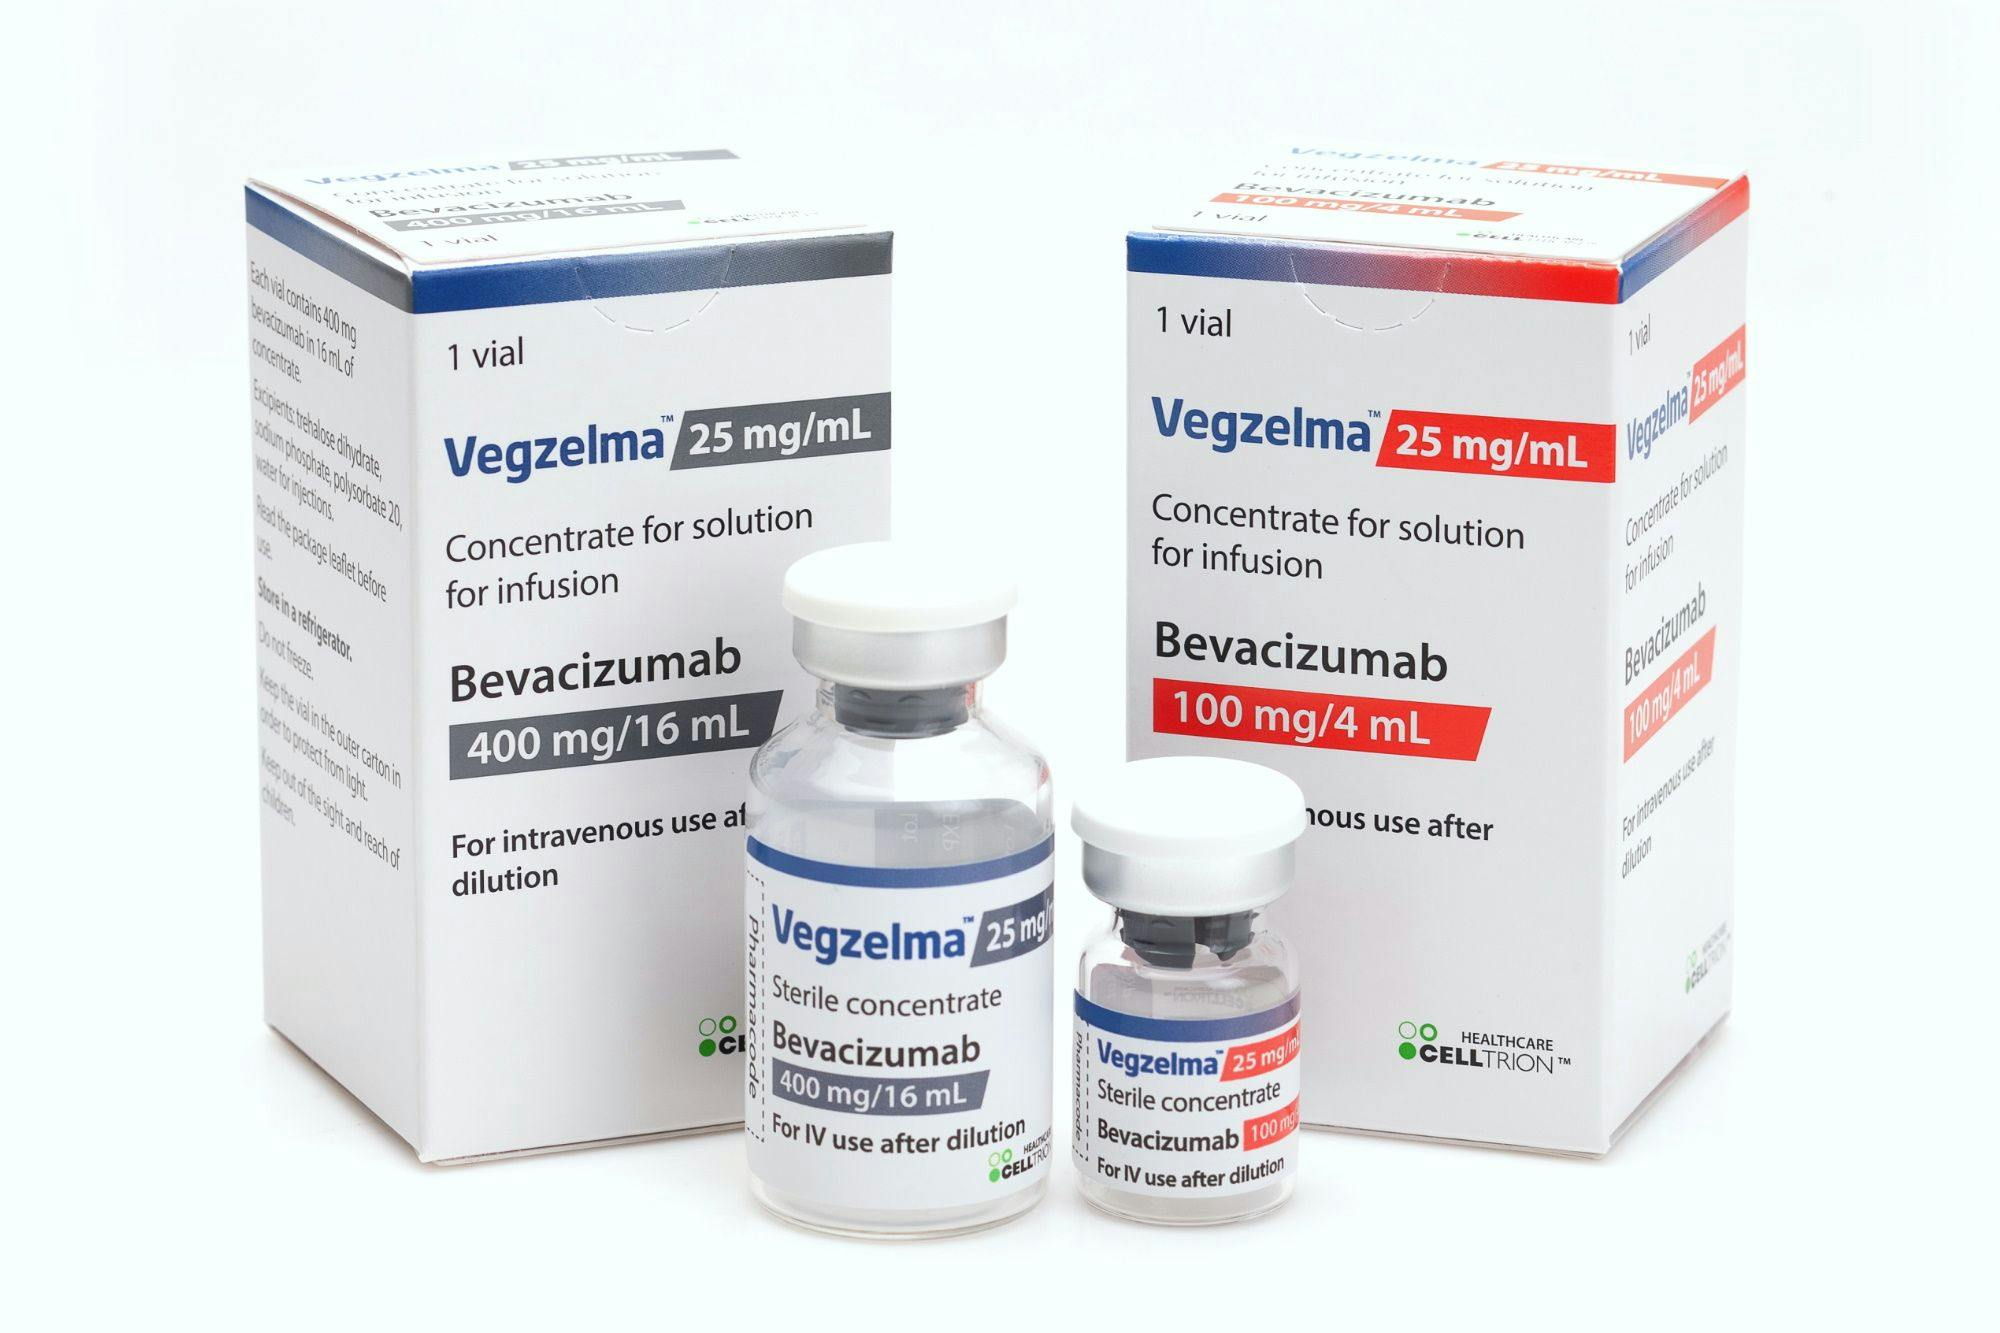 vegzelma vials and boxes